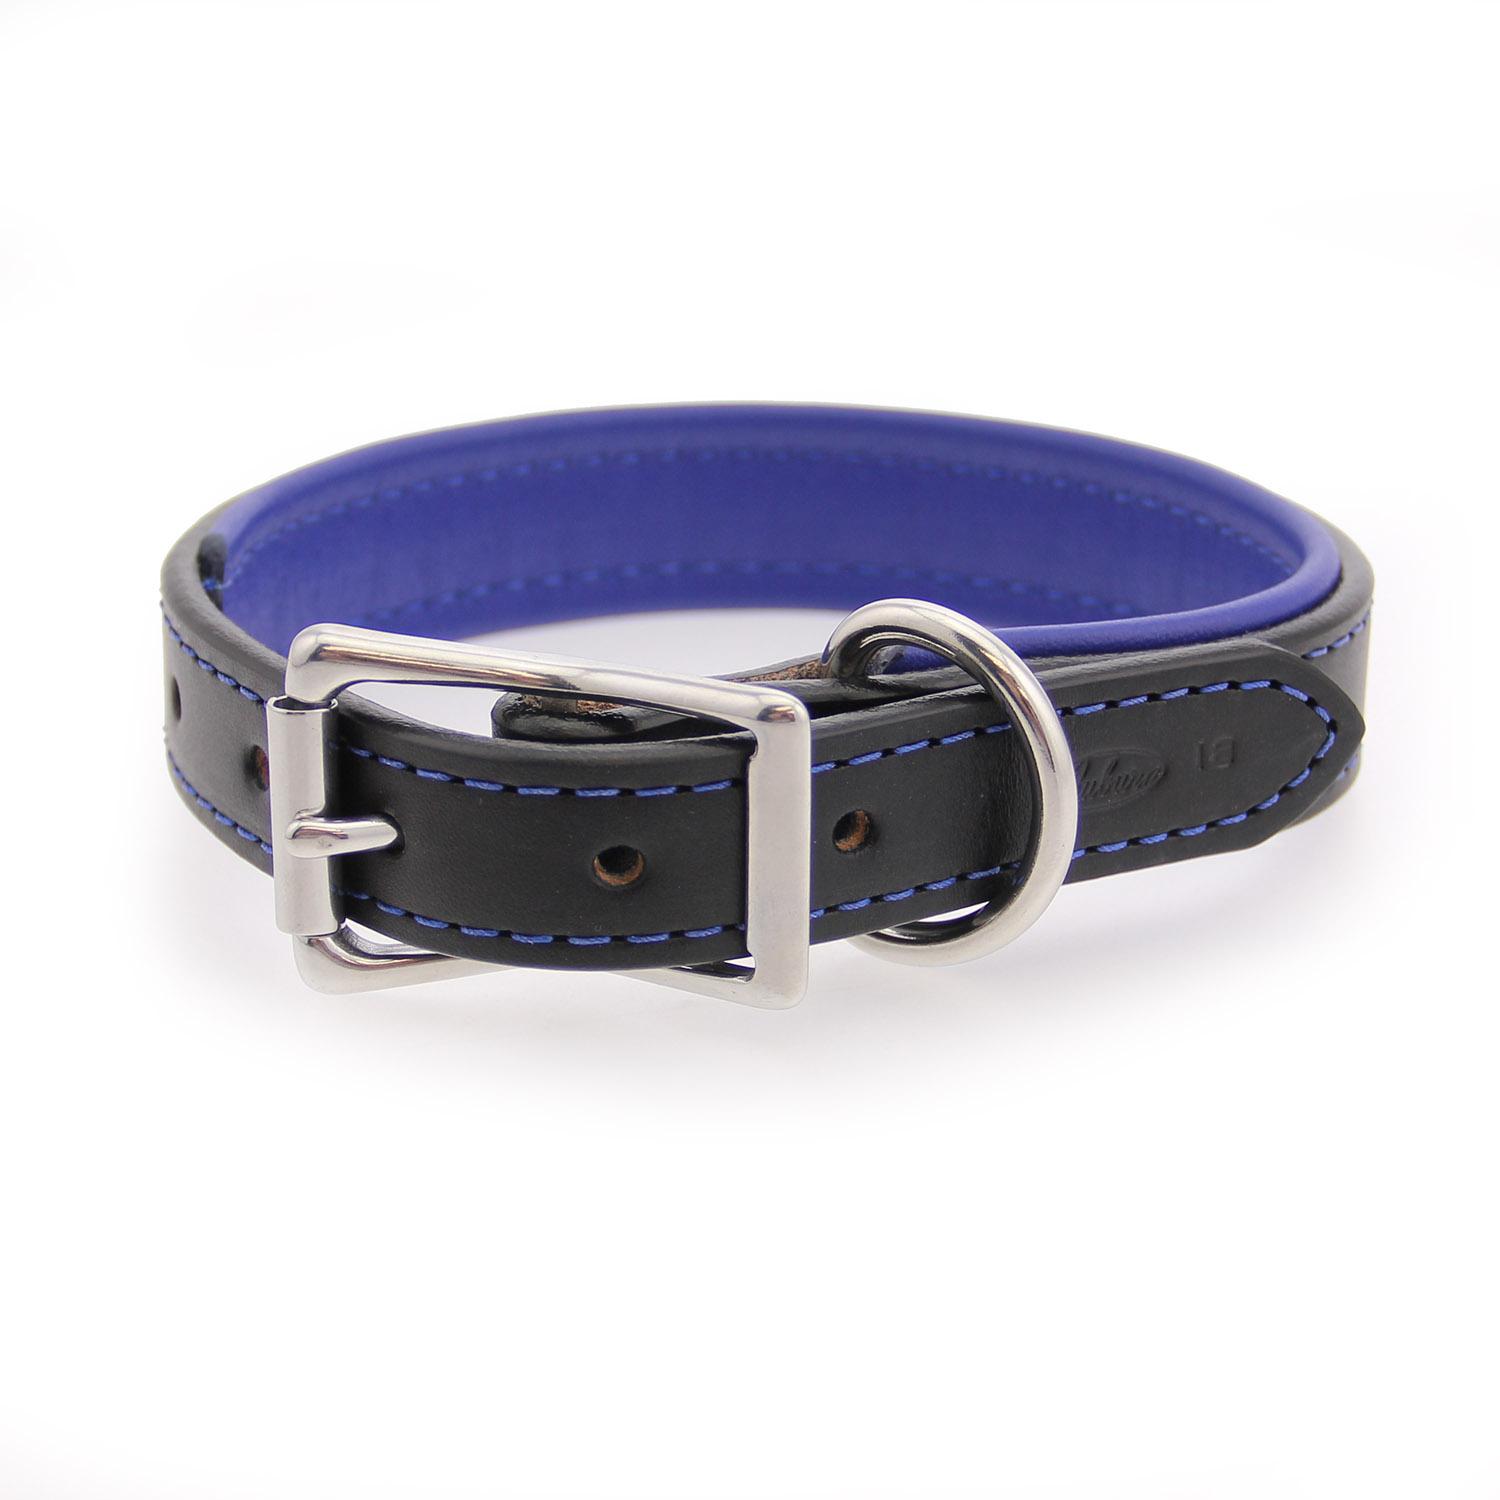 Two-Tone Padded Leather Dog Collar by Auburn Leather - Black and Blue